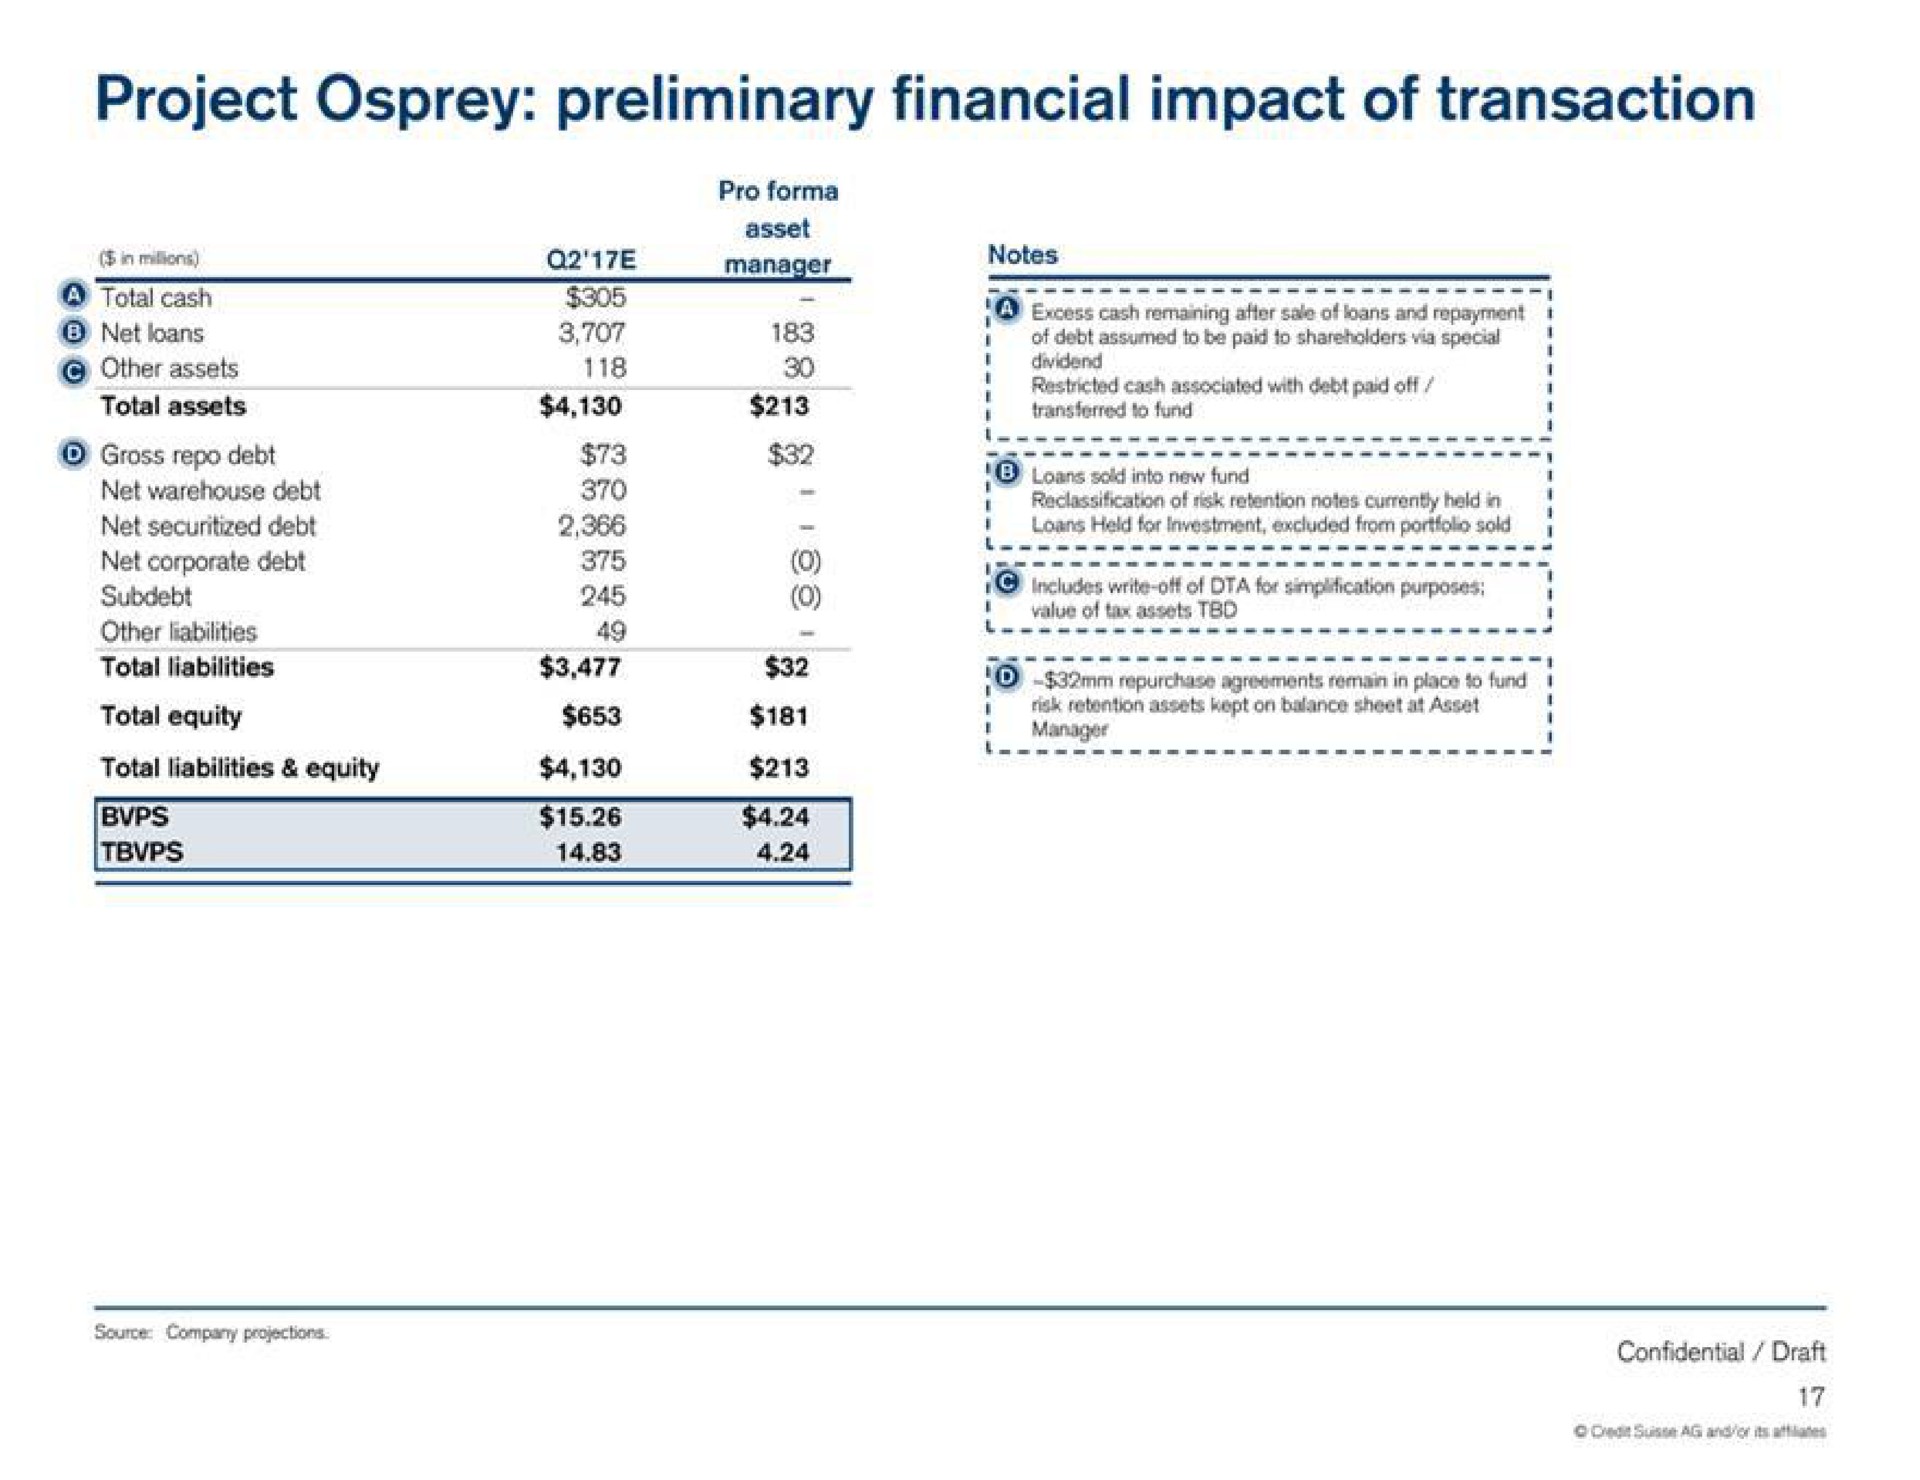 project osprey preliminary financial impact of transaction | Credit Suisse